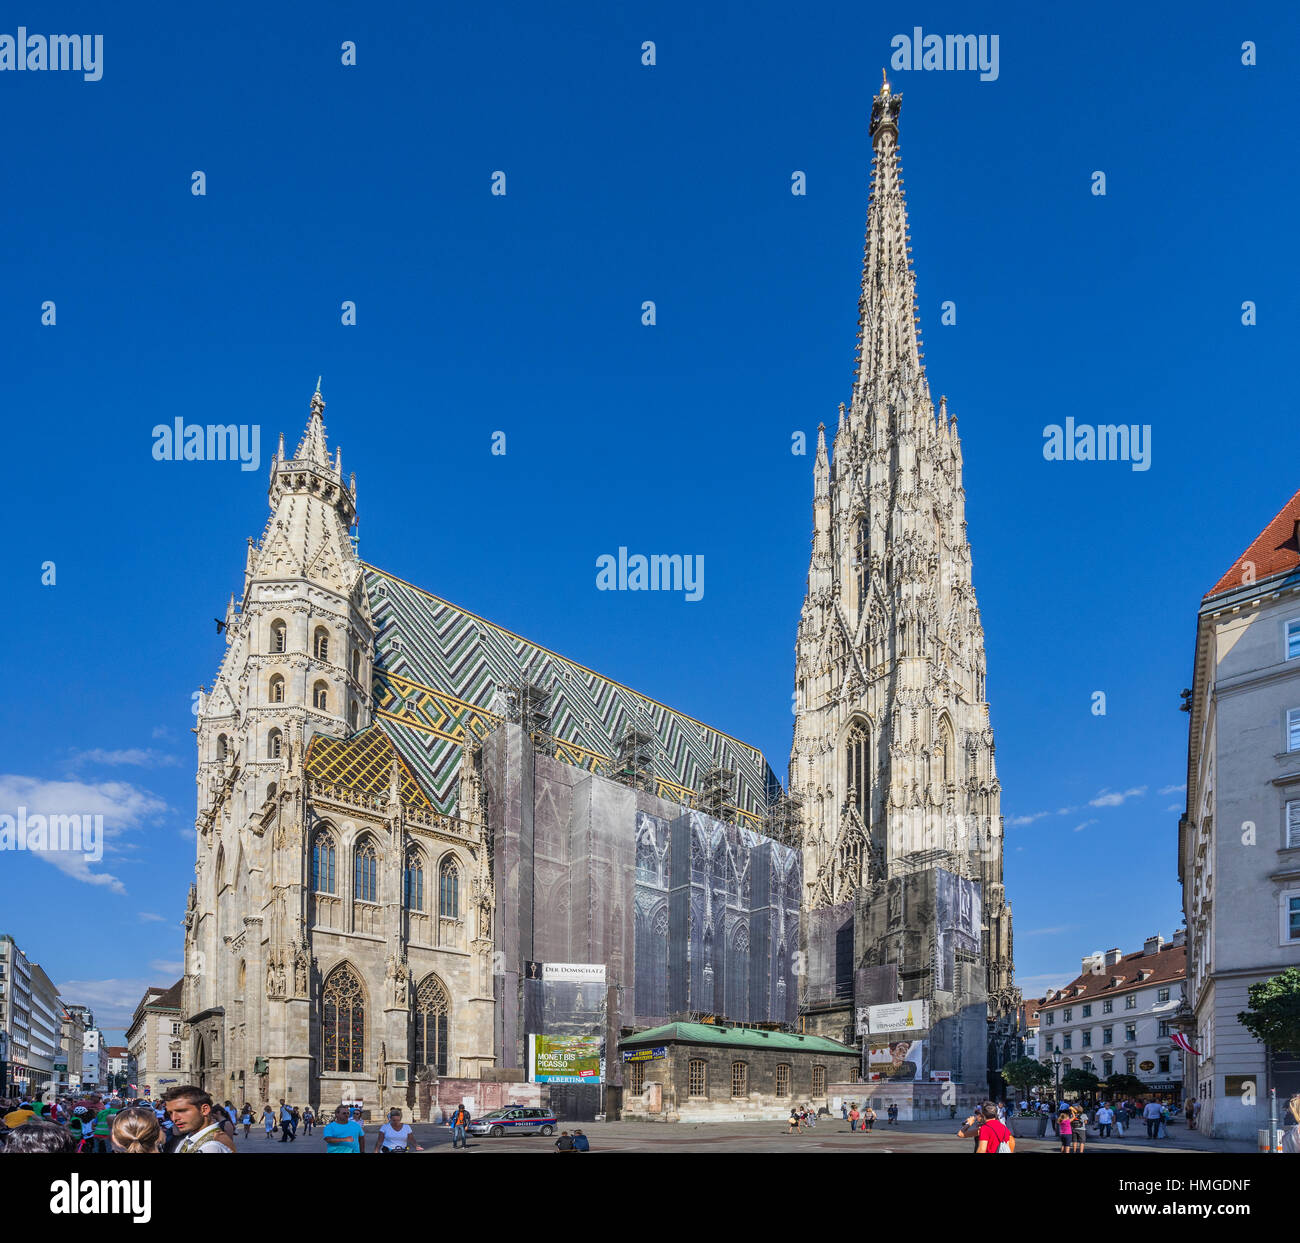 Austria, Vienna, Stephansplatz, skillfully disguised conservation and restauration effords at St. Stephen's Cathedral (Stephansdom) Stock Photo